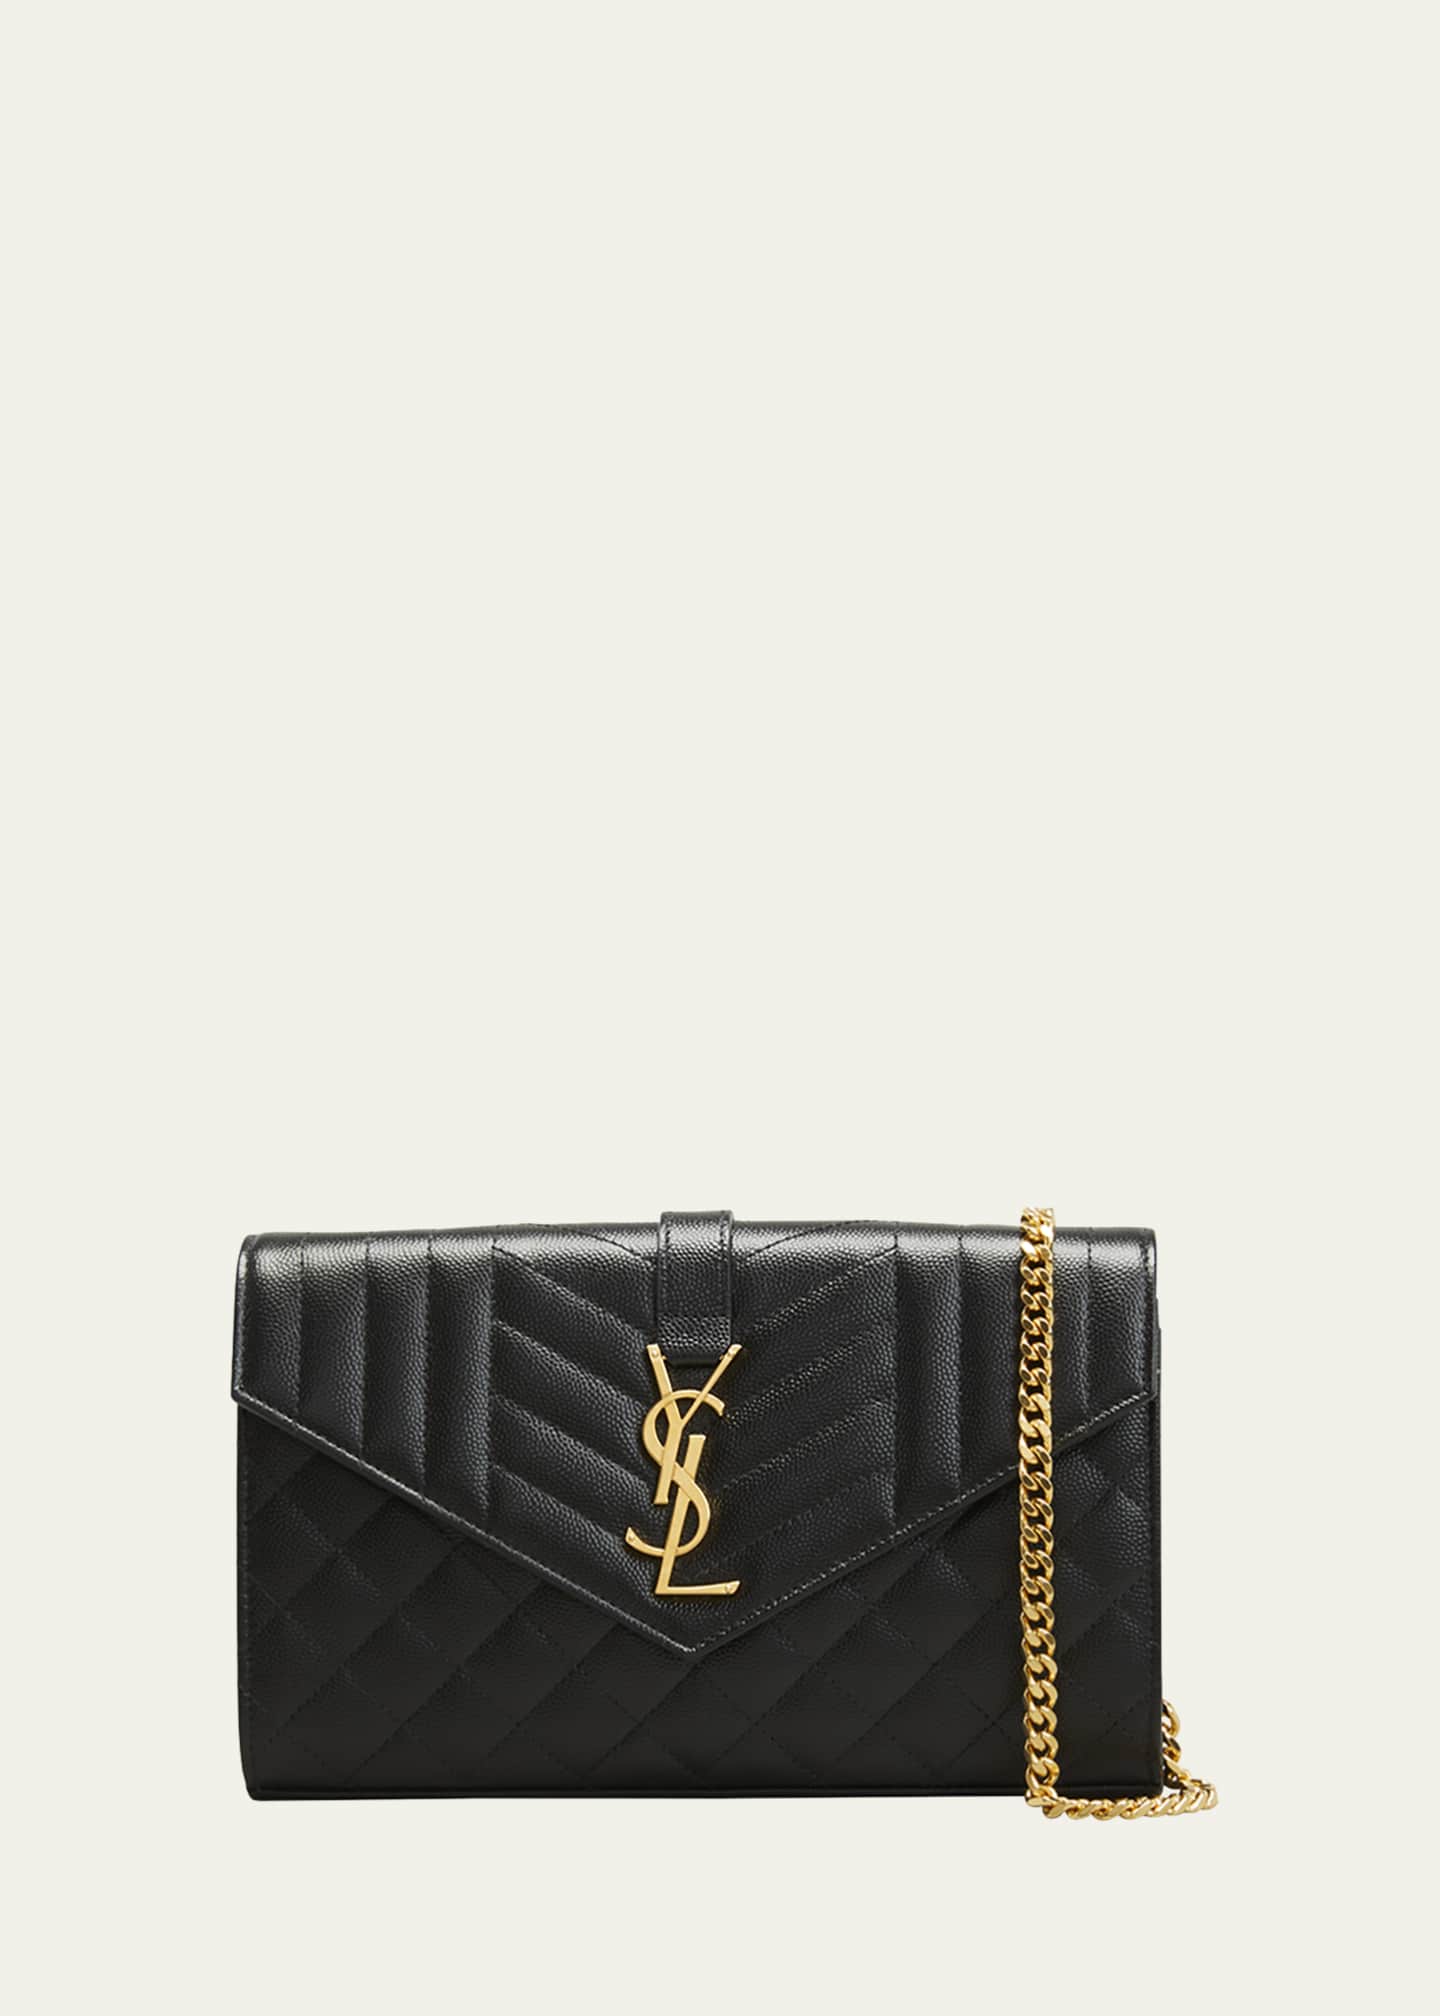 Saint Laurent YSL Quilted Leather Cosmetic Bag - Bergdorf Goodman